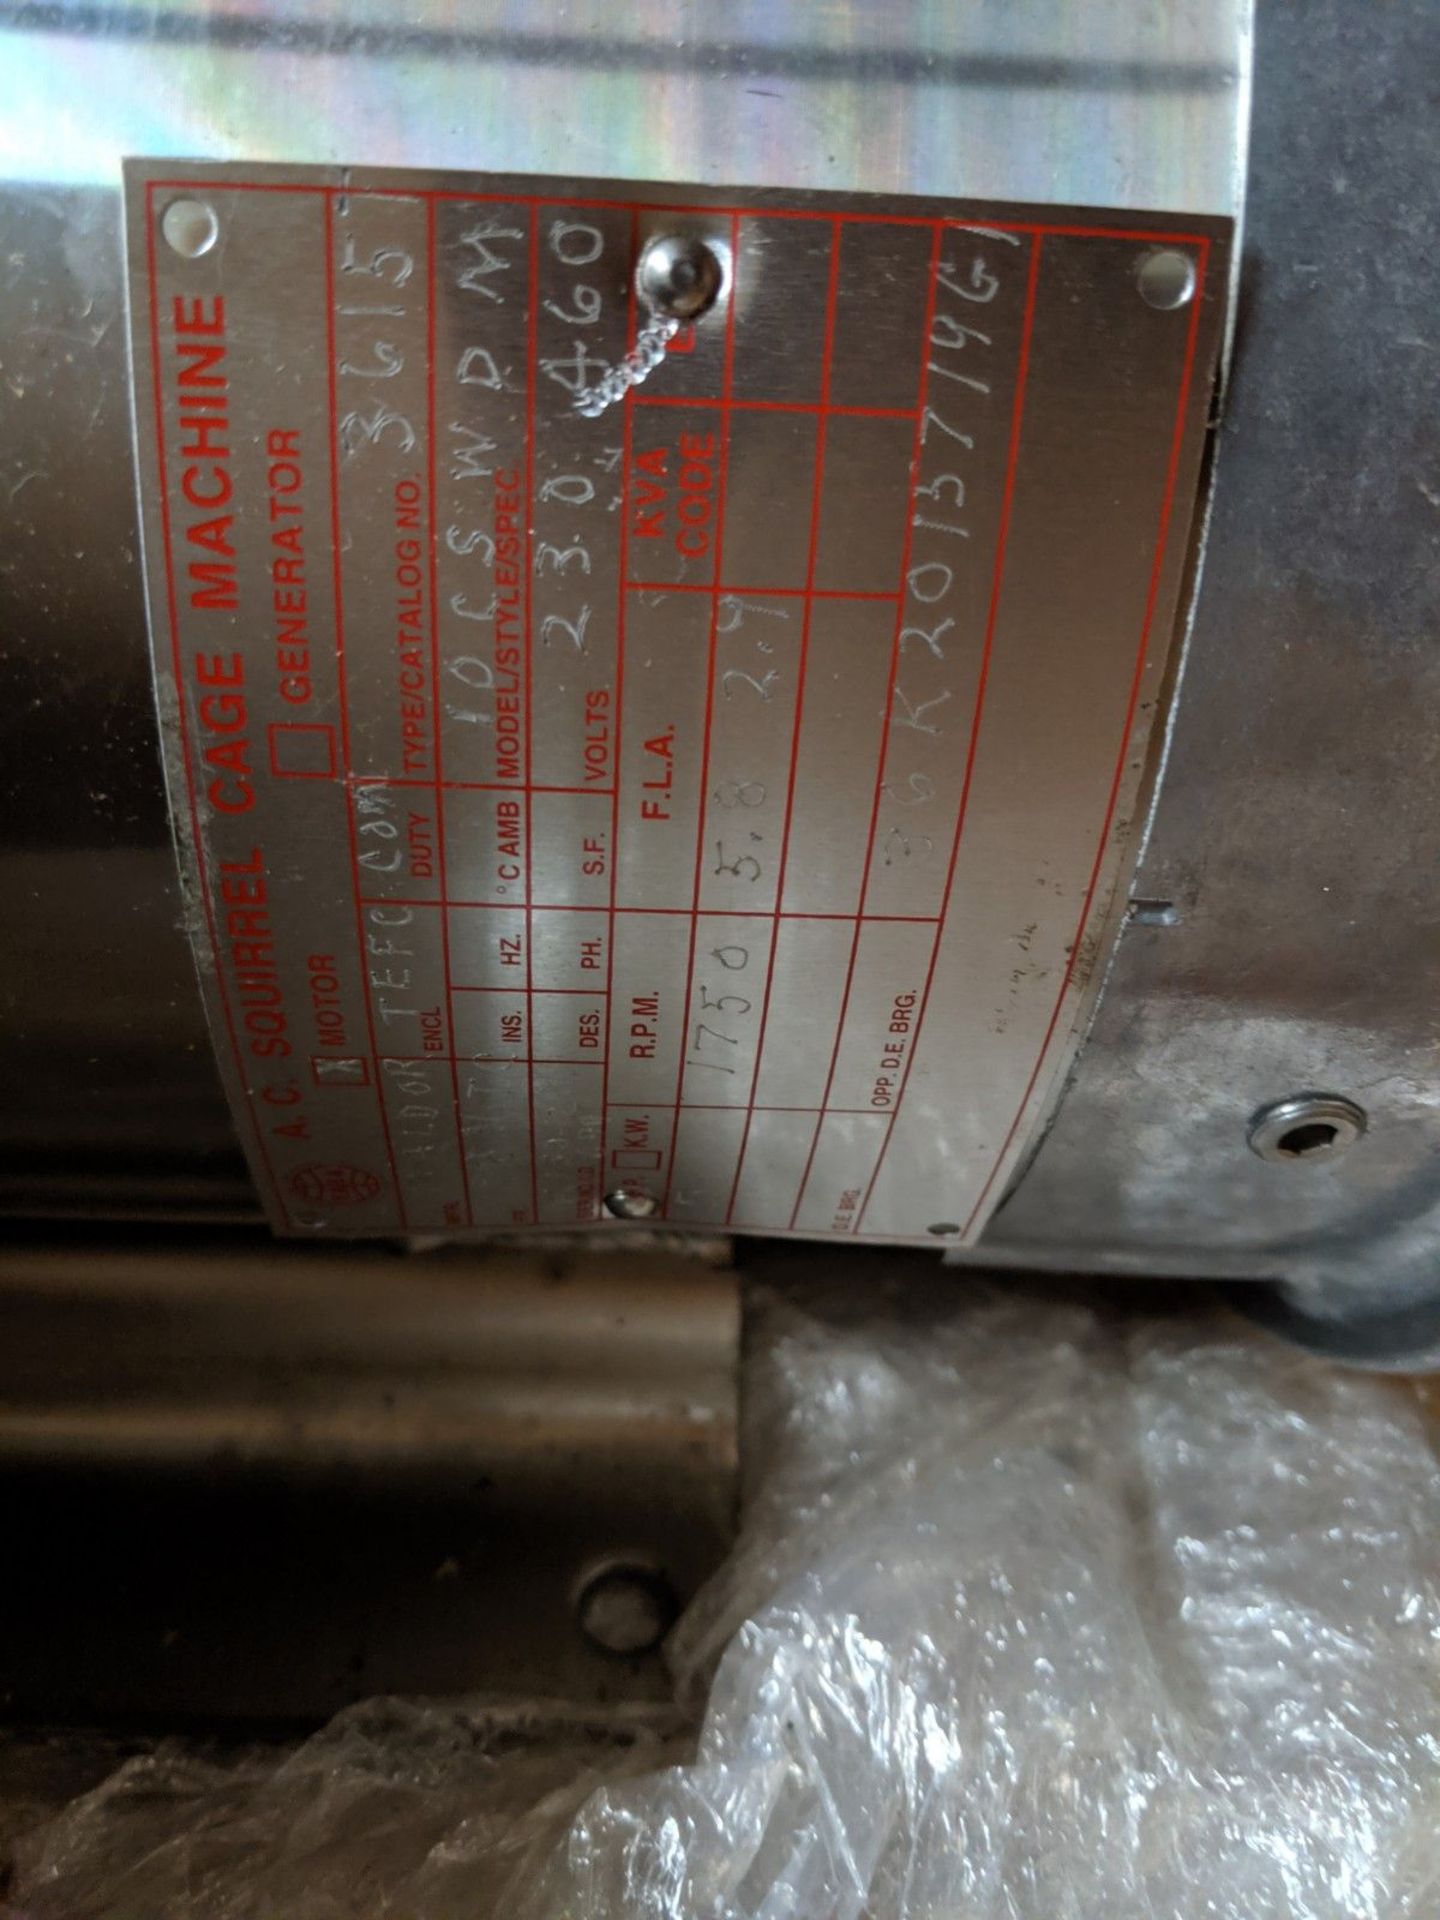 5 H.P. BALDOR STAINLESS STEEL MODEL 10CSWDM A.C. SQUIRREL CAGE MOTOR, 230/460 VOLT, 1750 RPM - Image 3 of 3